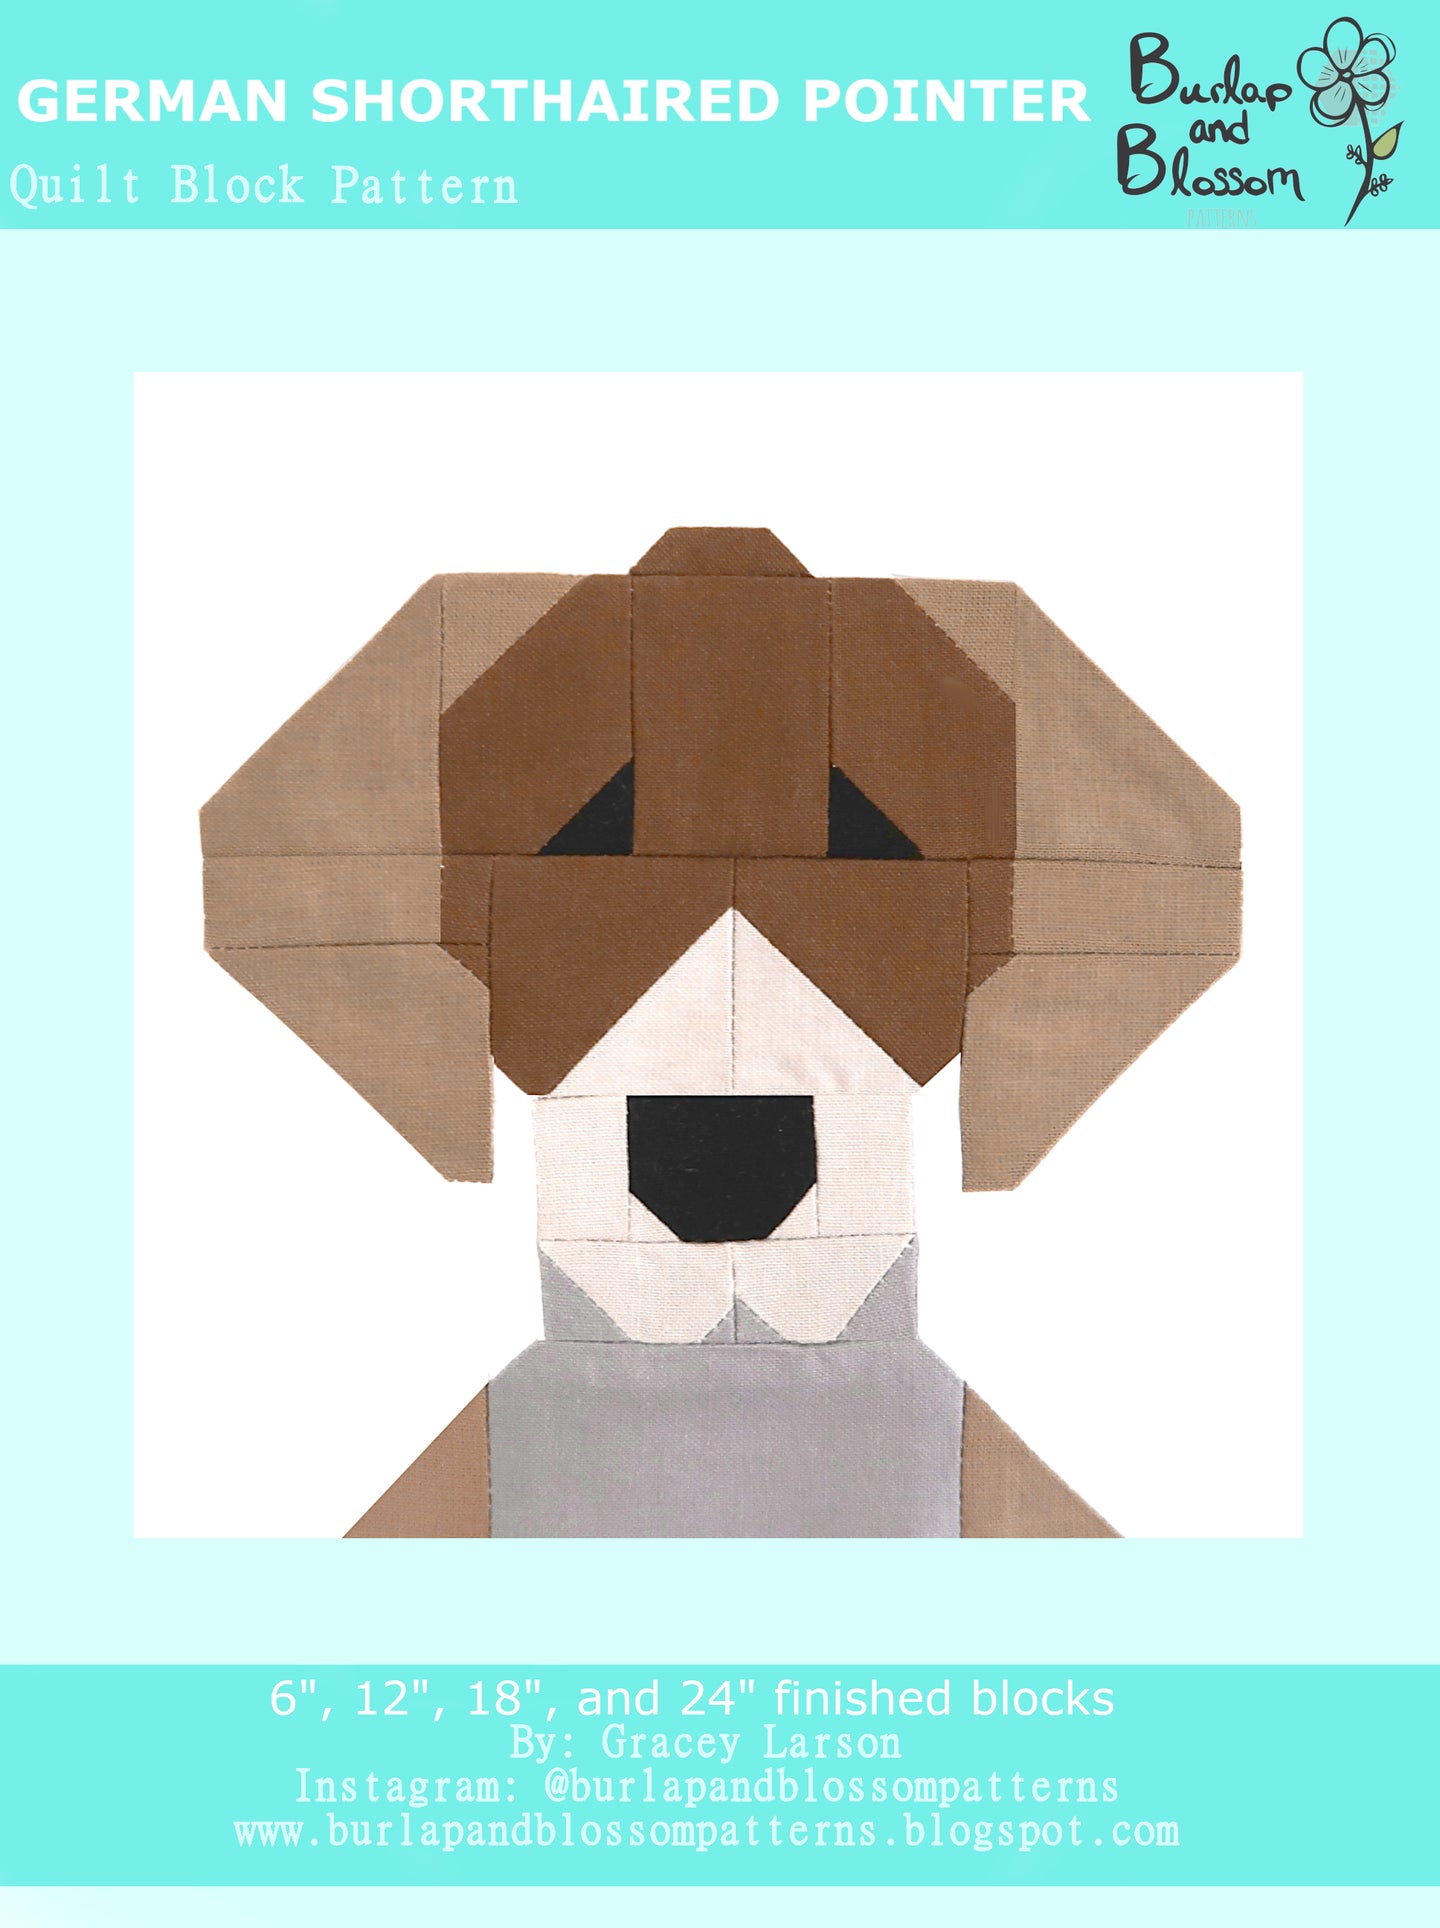 Pattern, German Shorthaired Pointer Quilt Block by Burlap and Blossom (digital download)